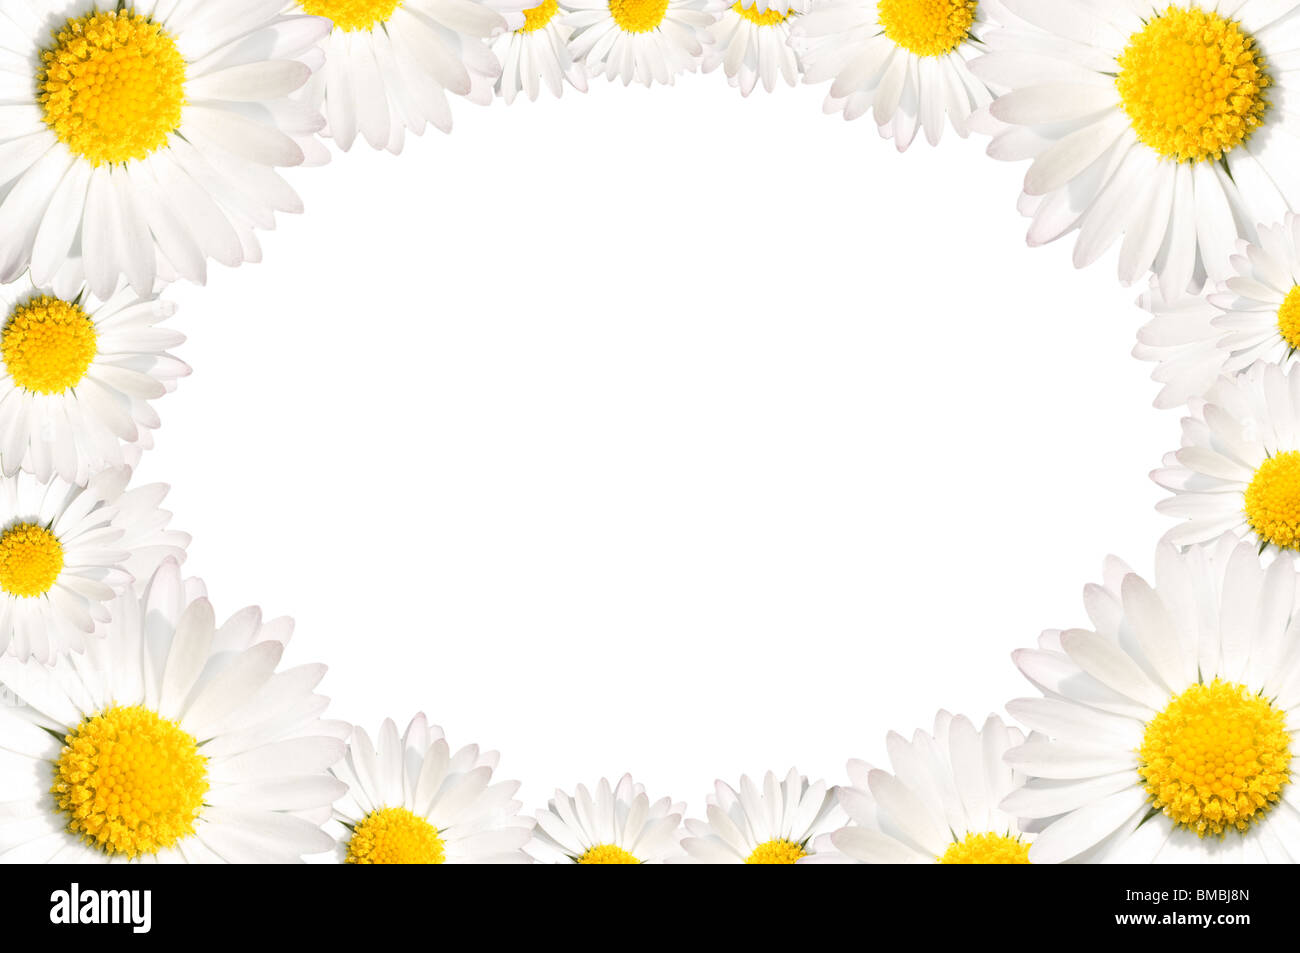 Floral frame made of common daisy flowers. Stock Photo